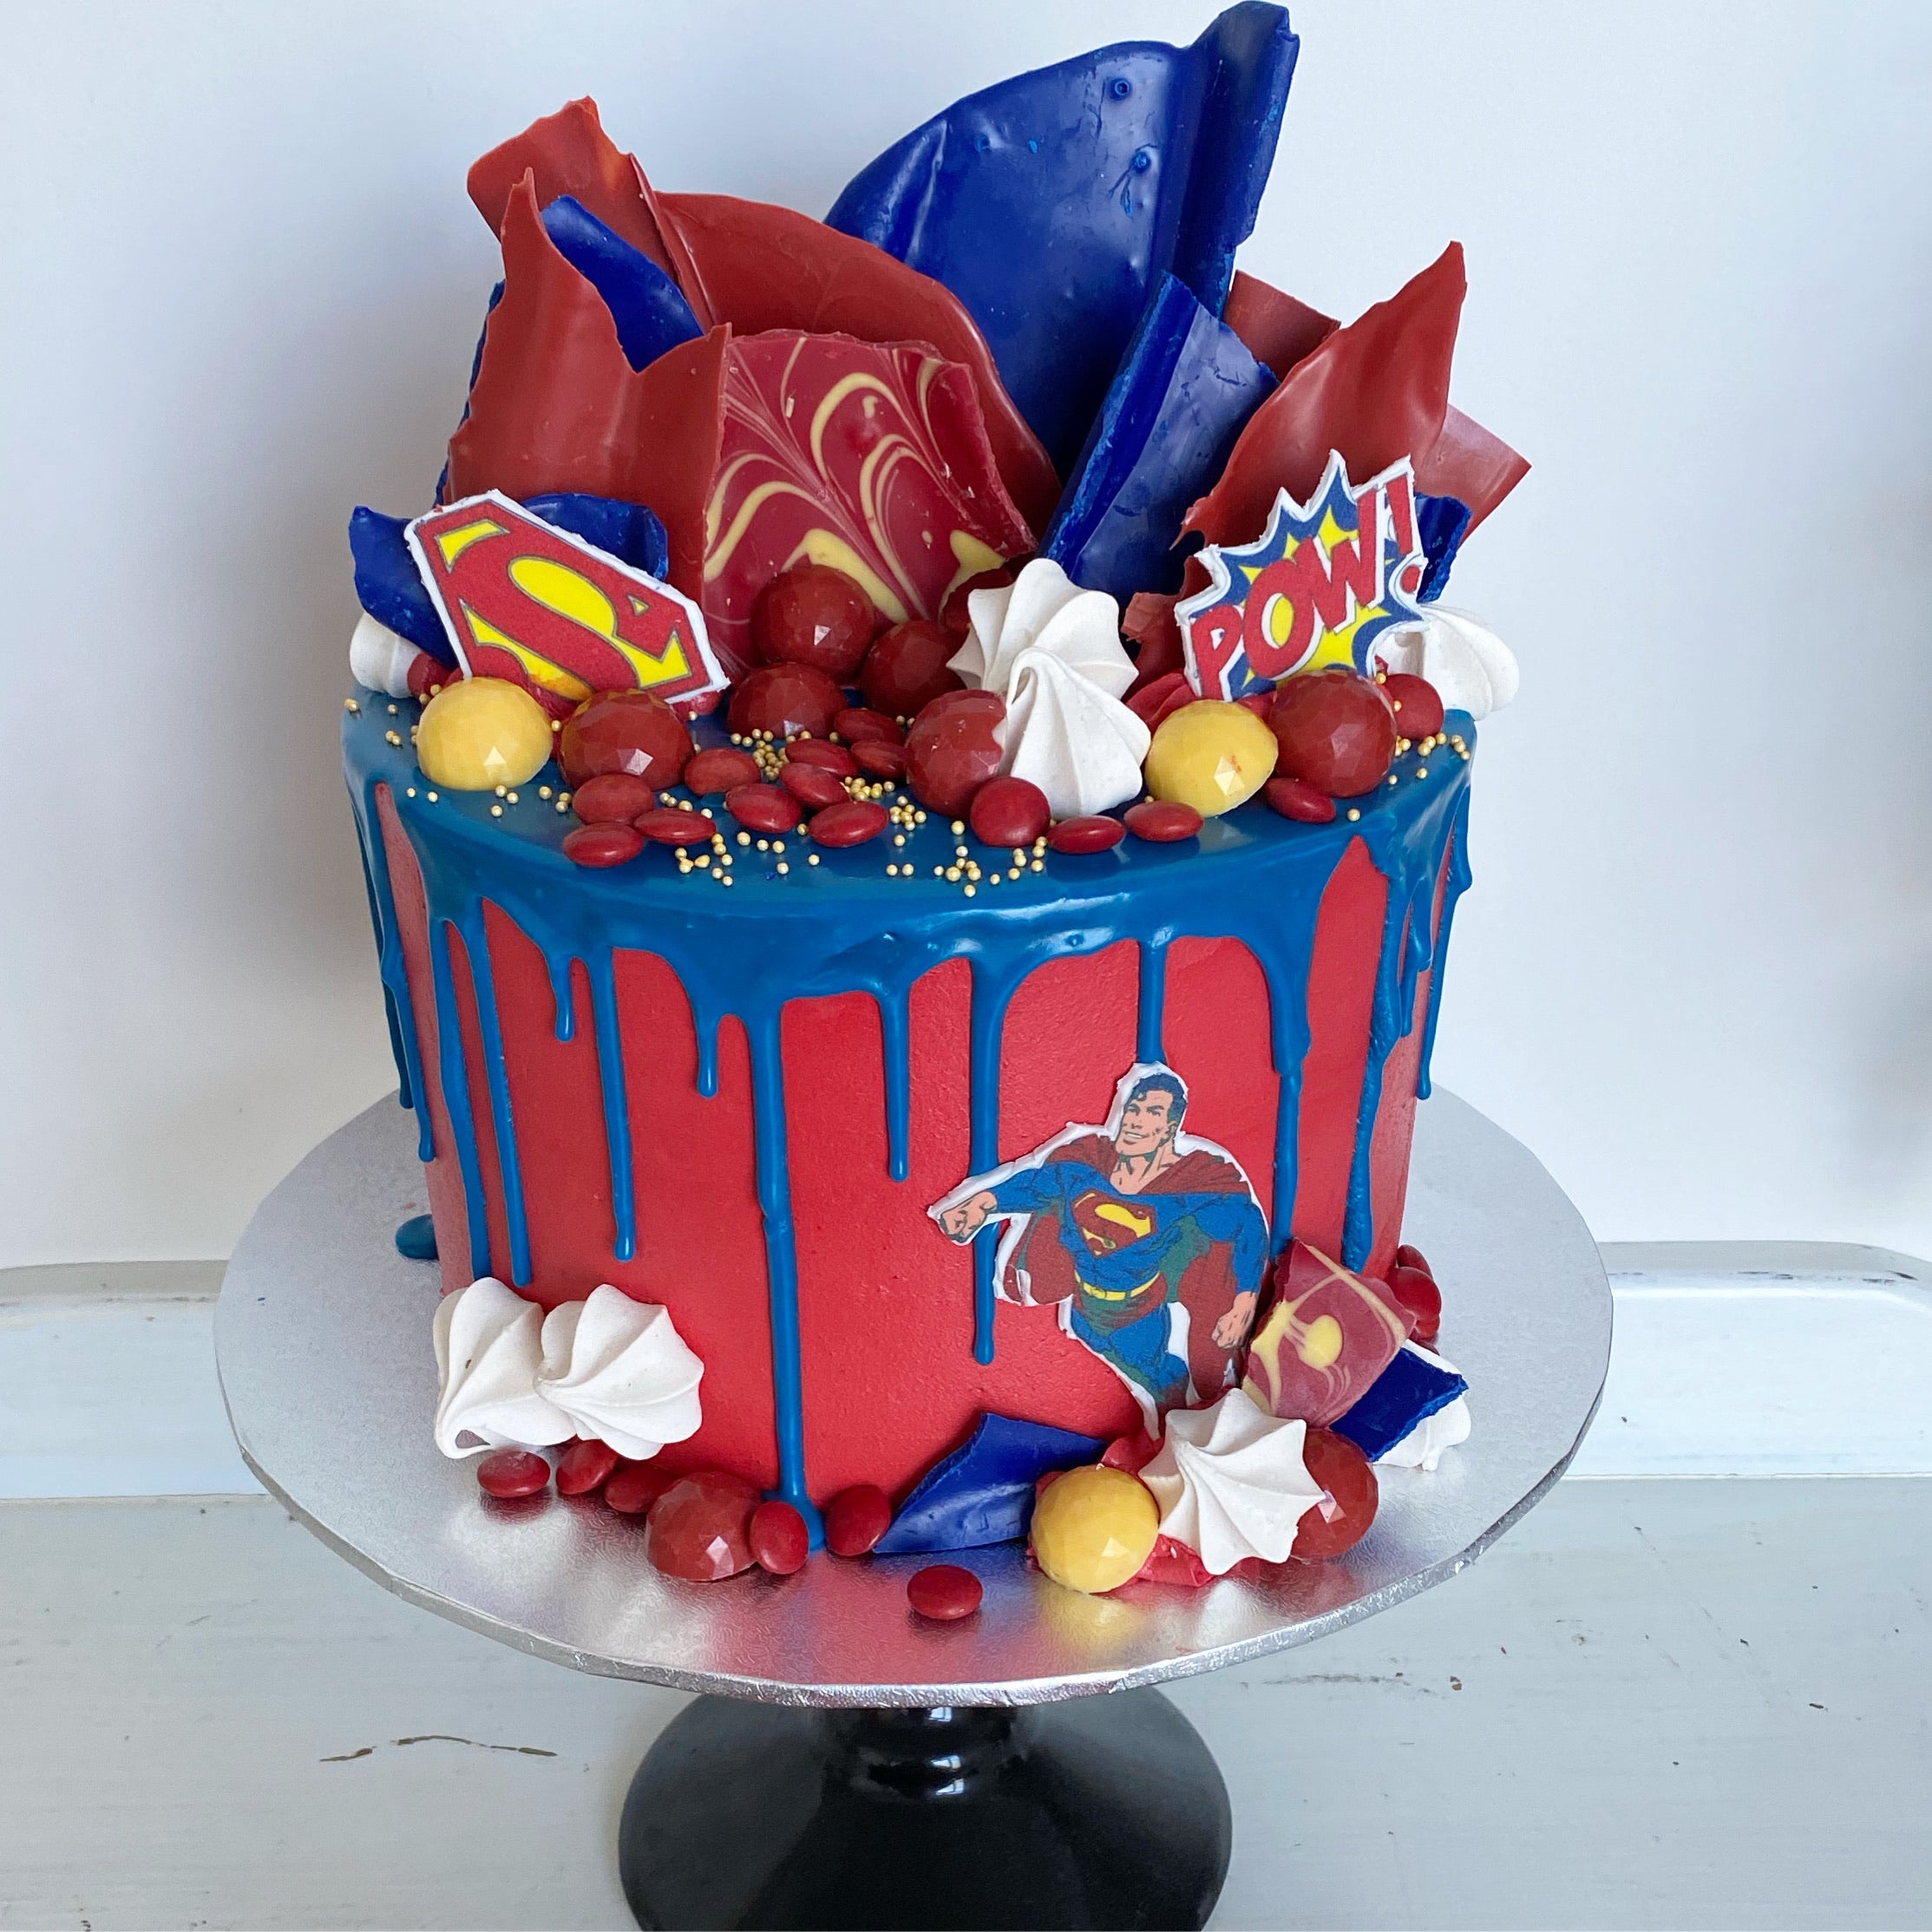 Superhero Cakes & Cupcakes | Claygate, Surrey | Afternoon Crumbs